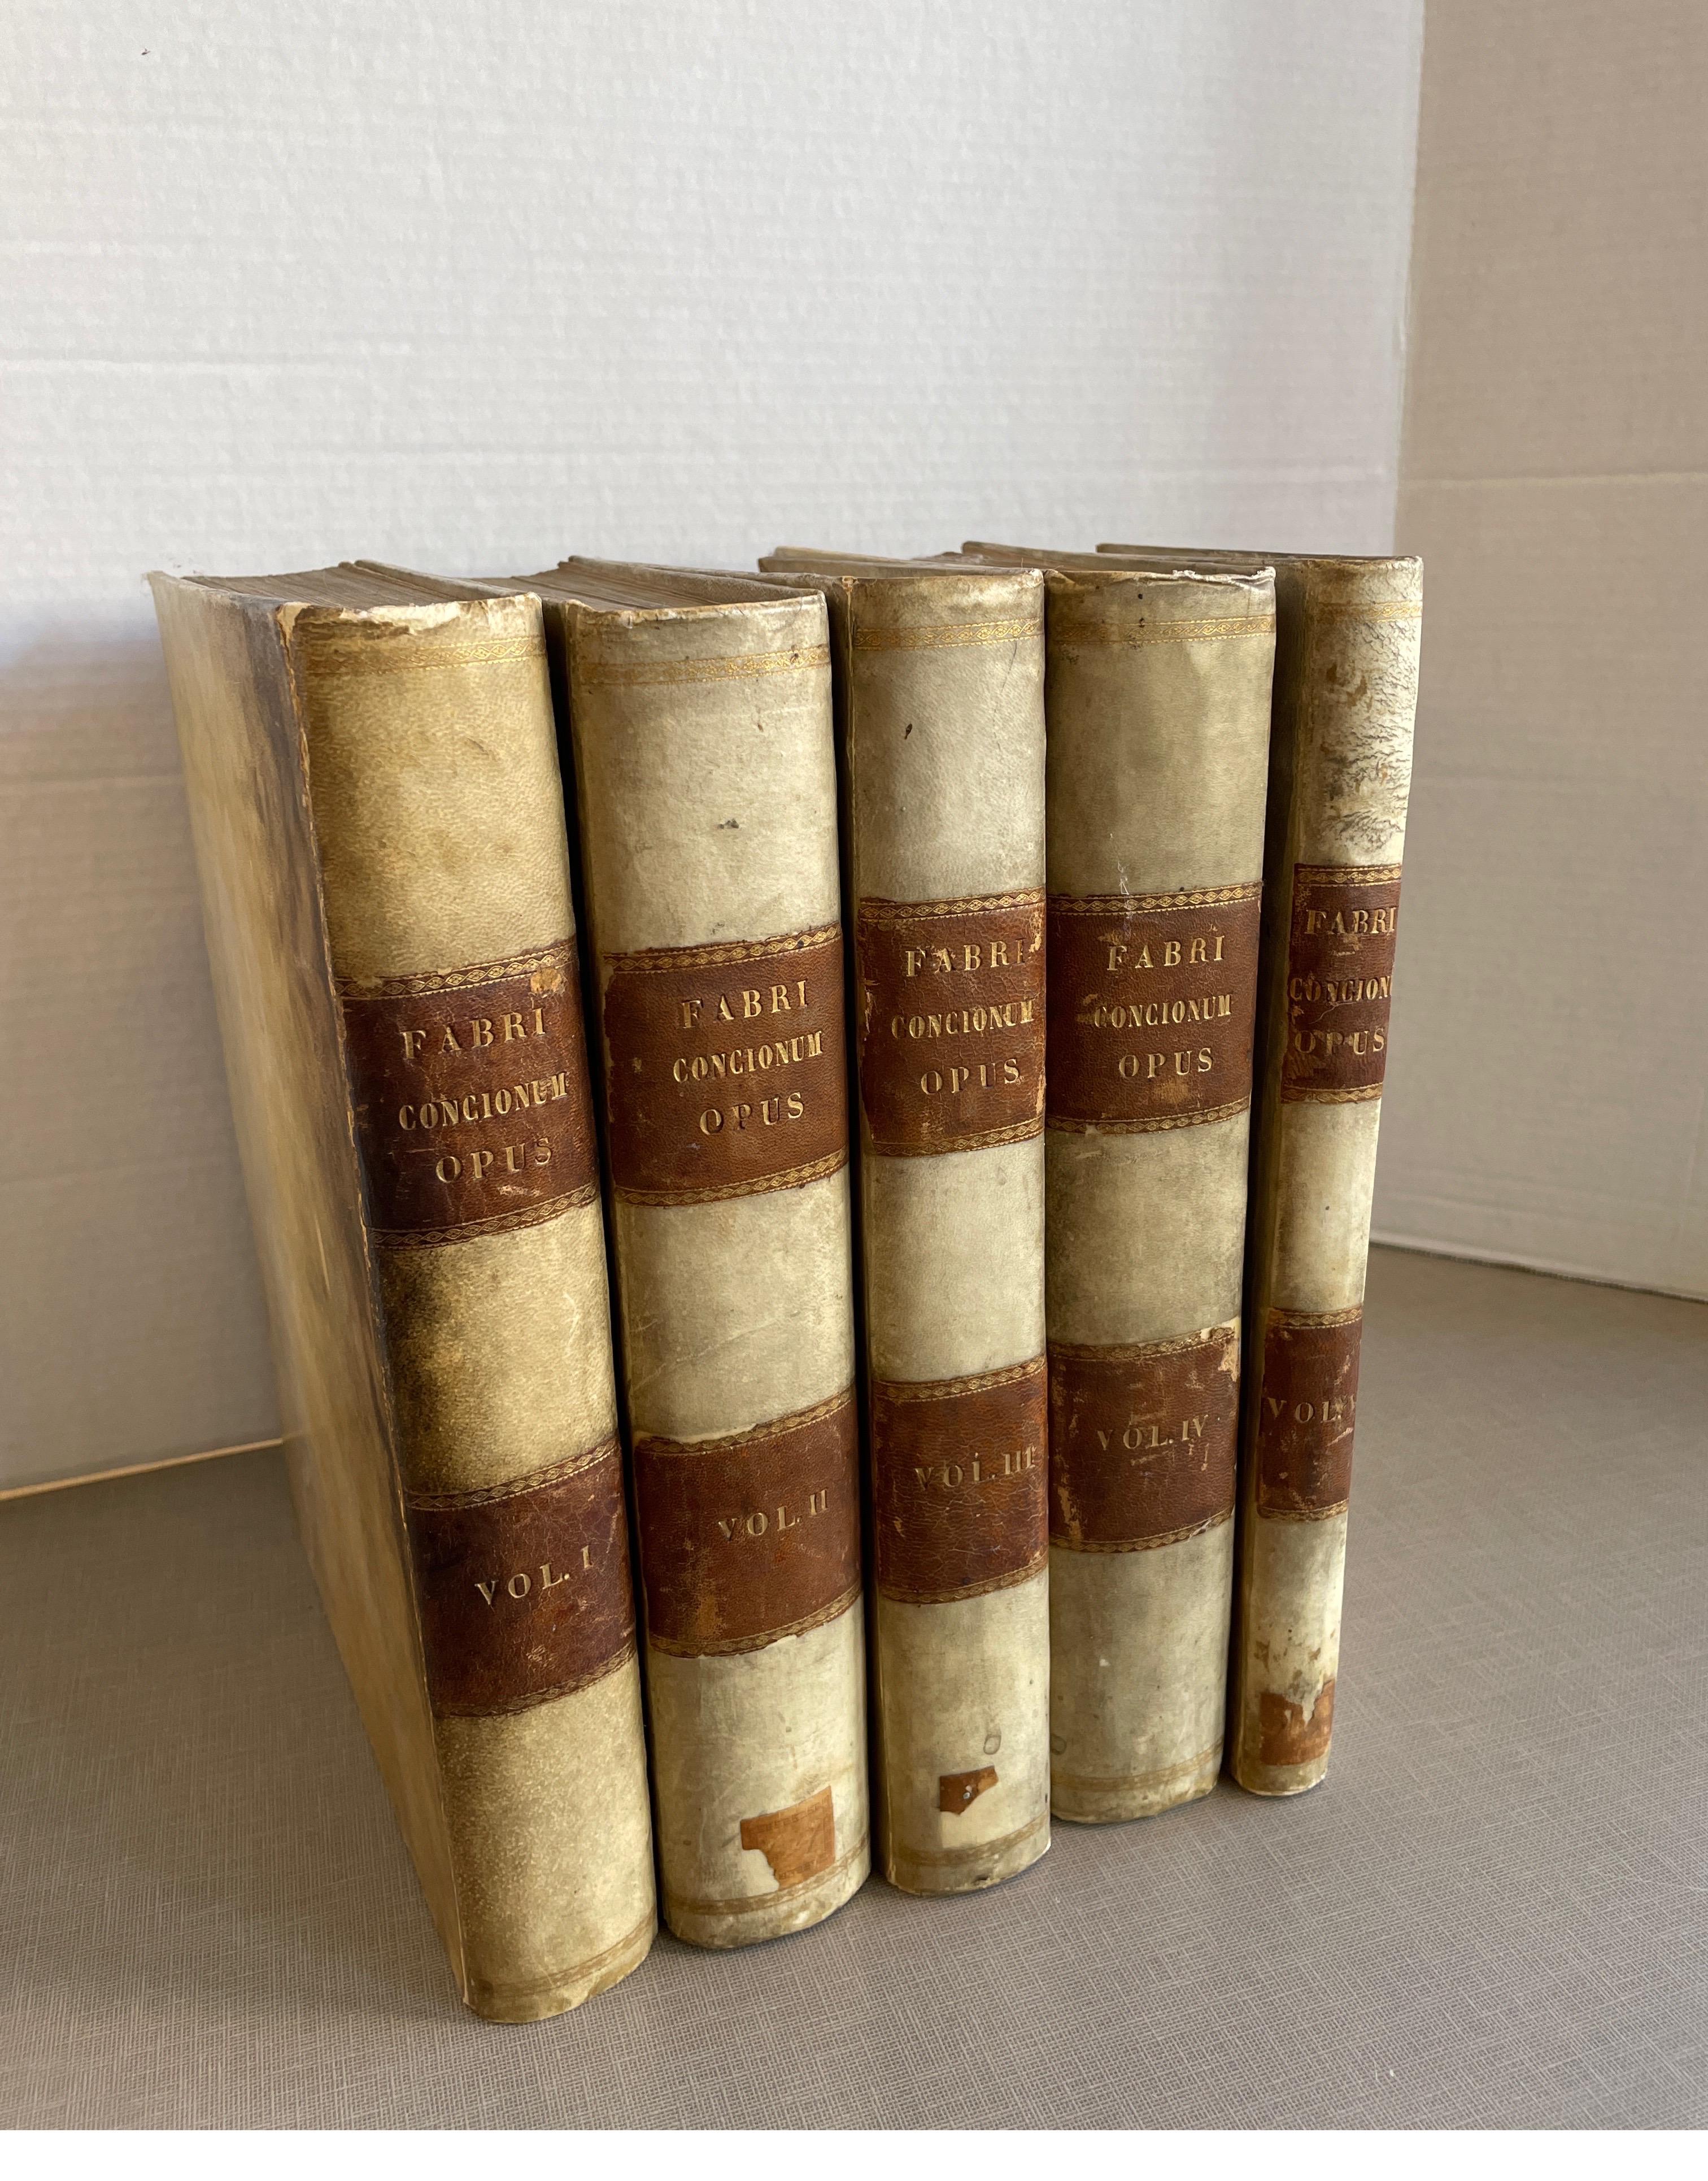 A rare set of 5 vellum books from 1872
The dimensions are for the 5 books stacked together 